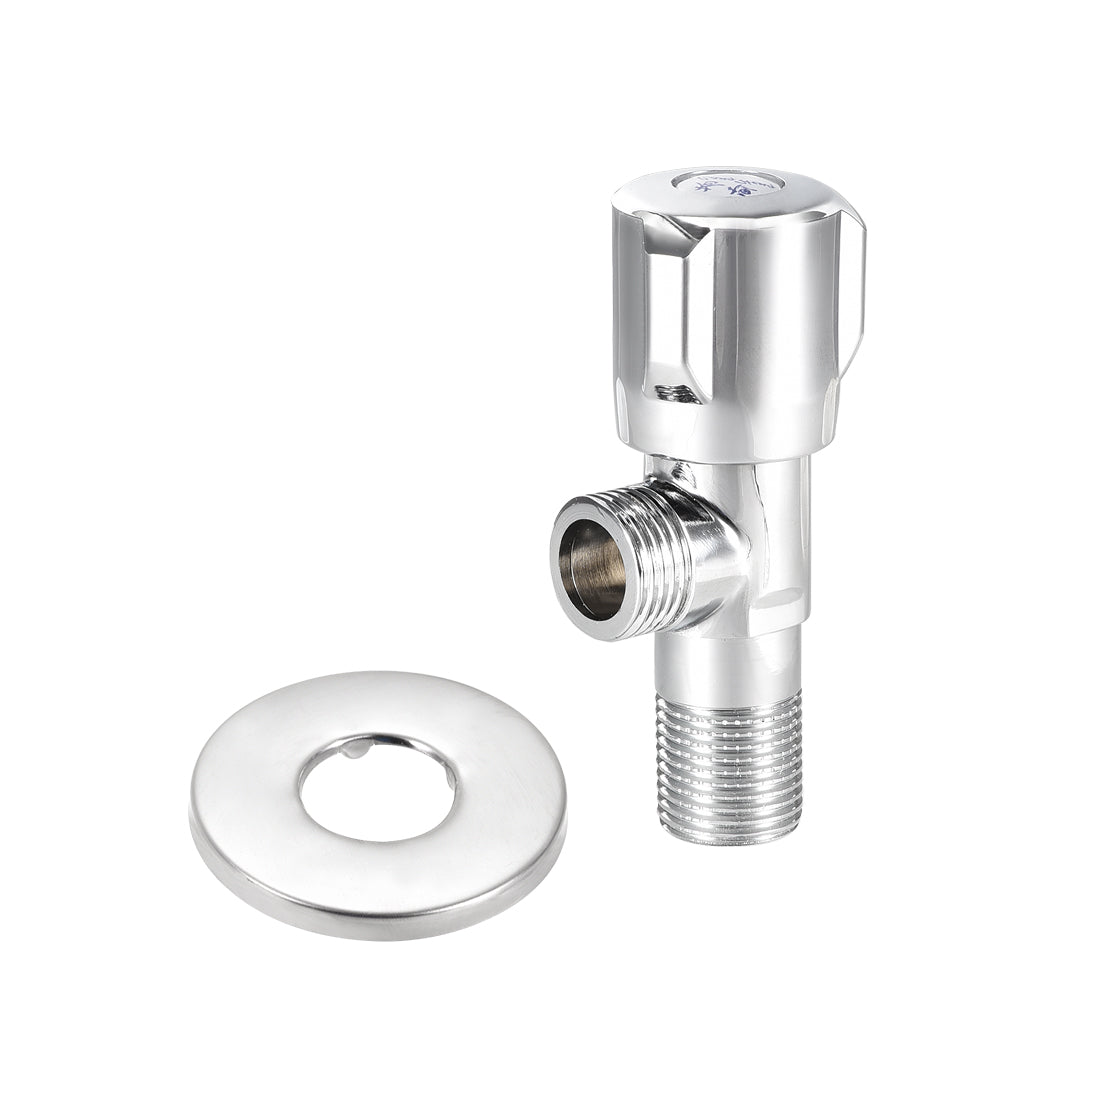 uxcell Uxcell Angle Valve Water Stop Valve G1/2 Male Thread 2-way Rotary Nickel Plated Brass with Ornament Cover